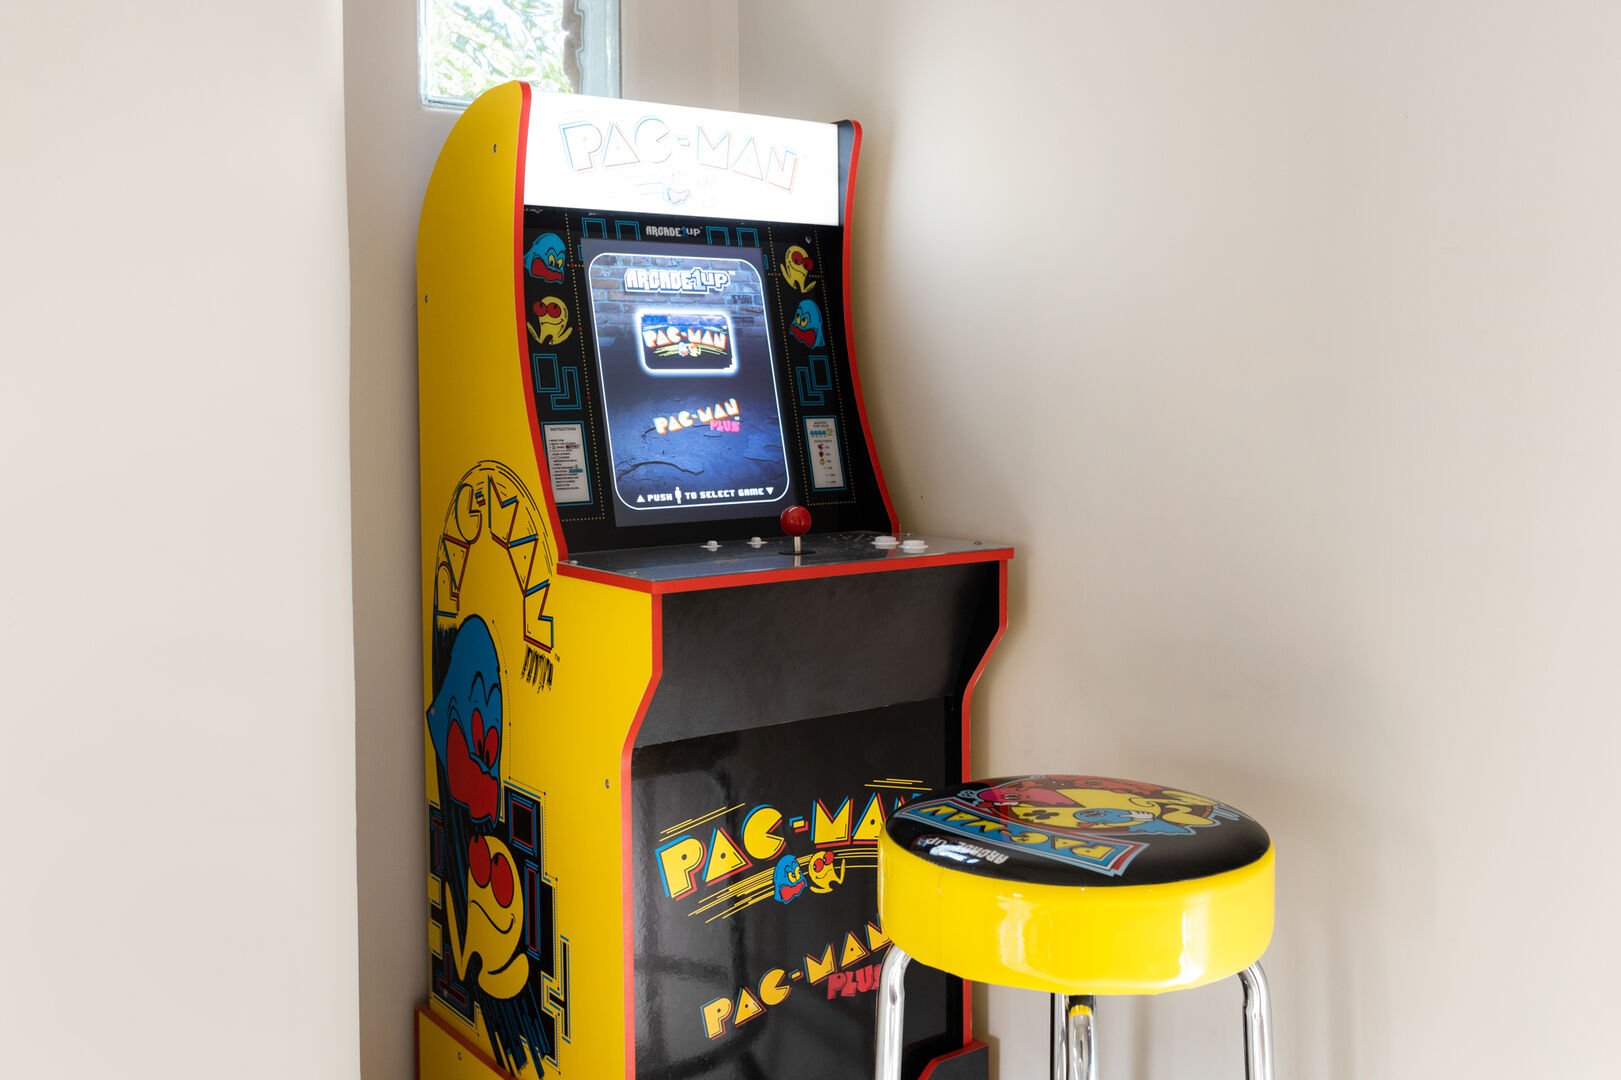 They Even Have Pac Man!!!